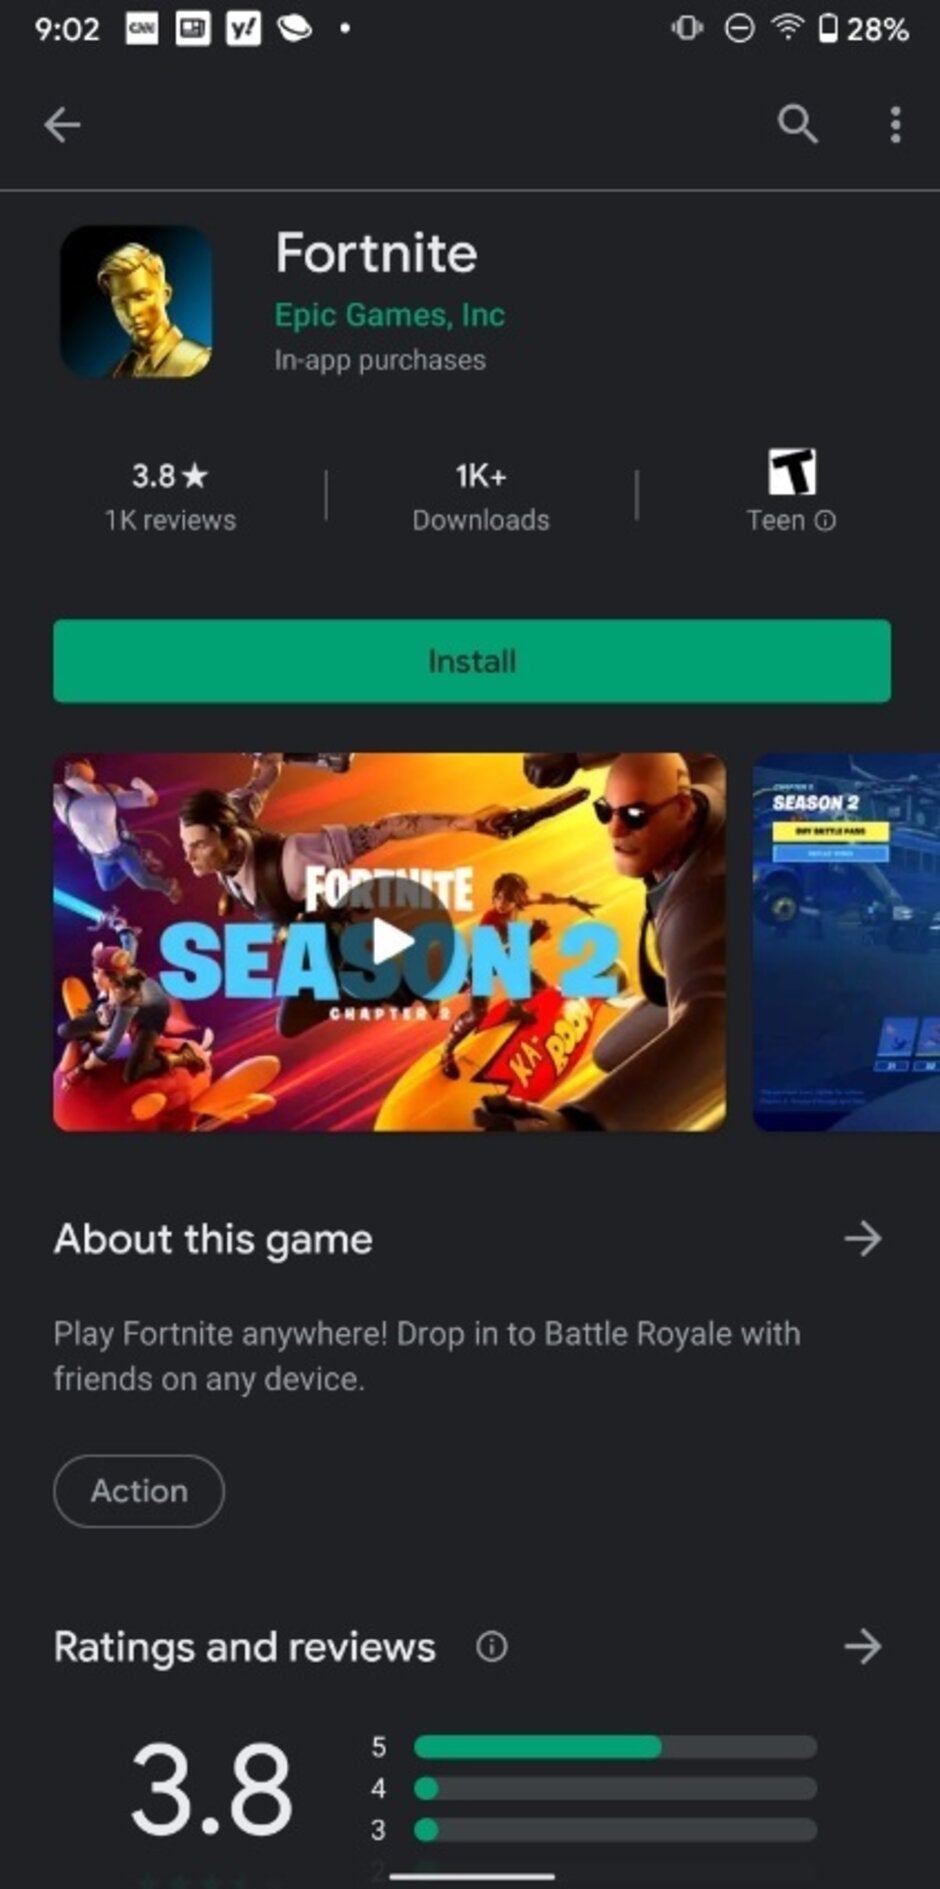 Fortnite is now available from the Google Play Store - Epic decision lands Fortnite in the Google Play Store